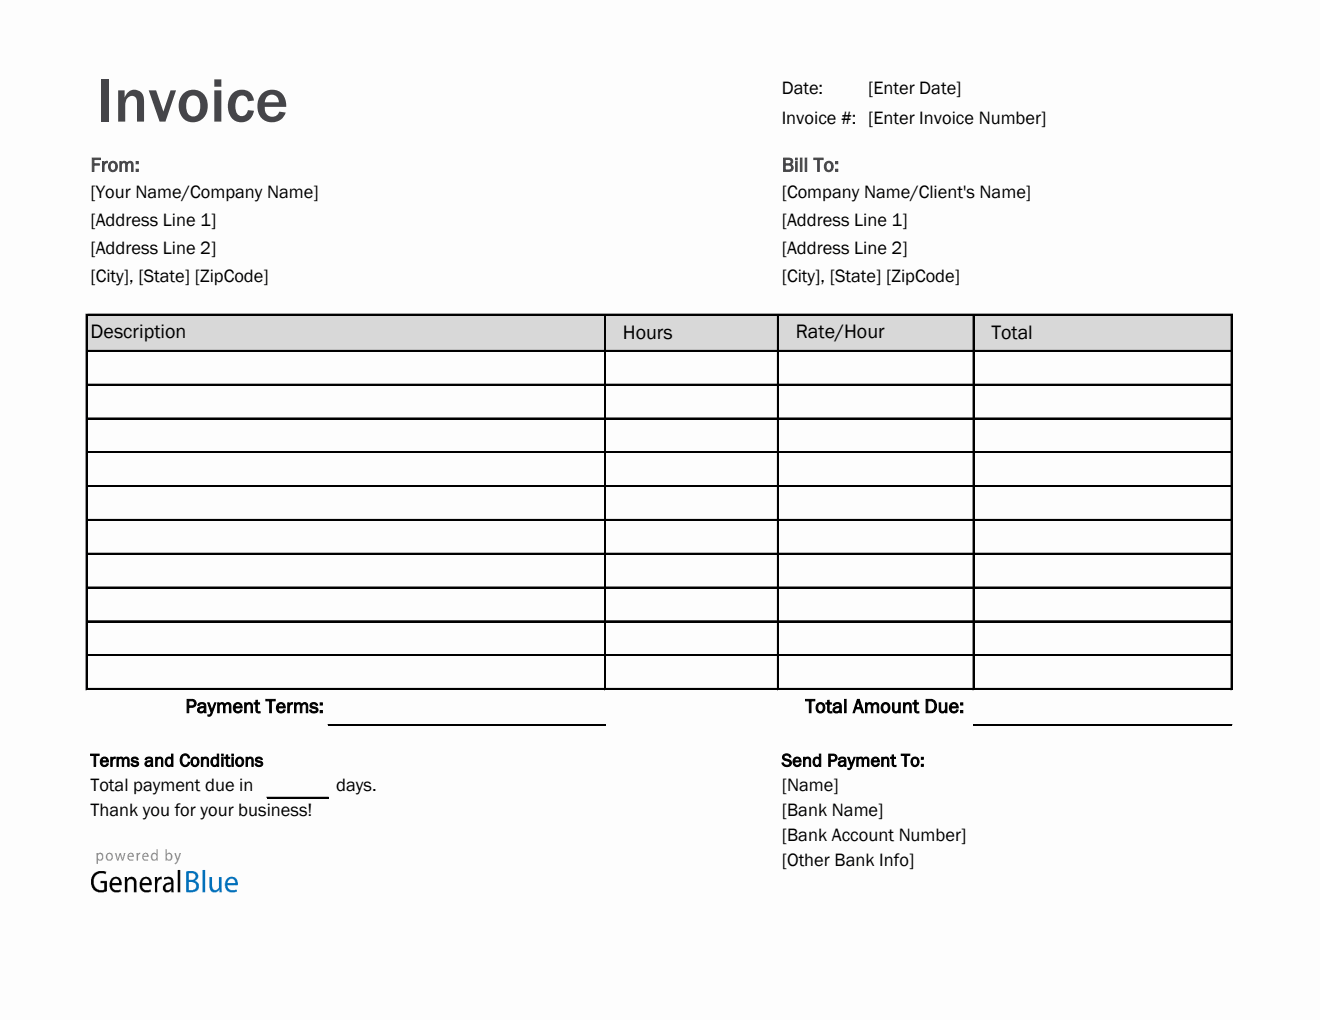 Freelance Hourly Invoice Template in Excel (Simple)